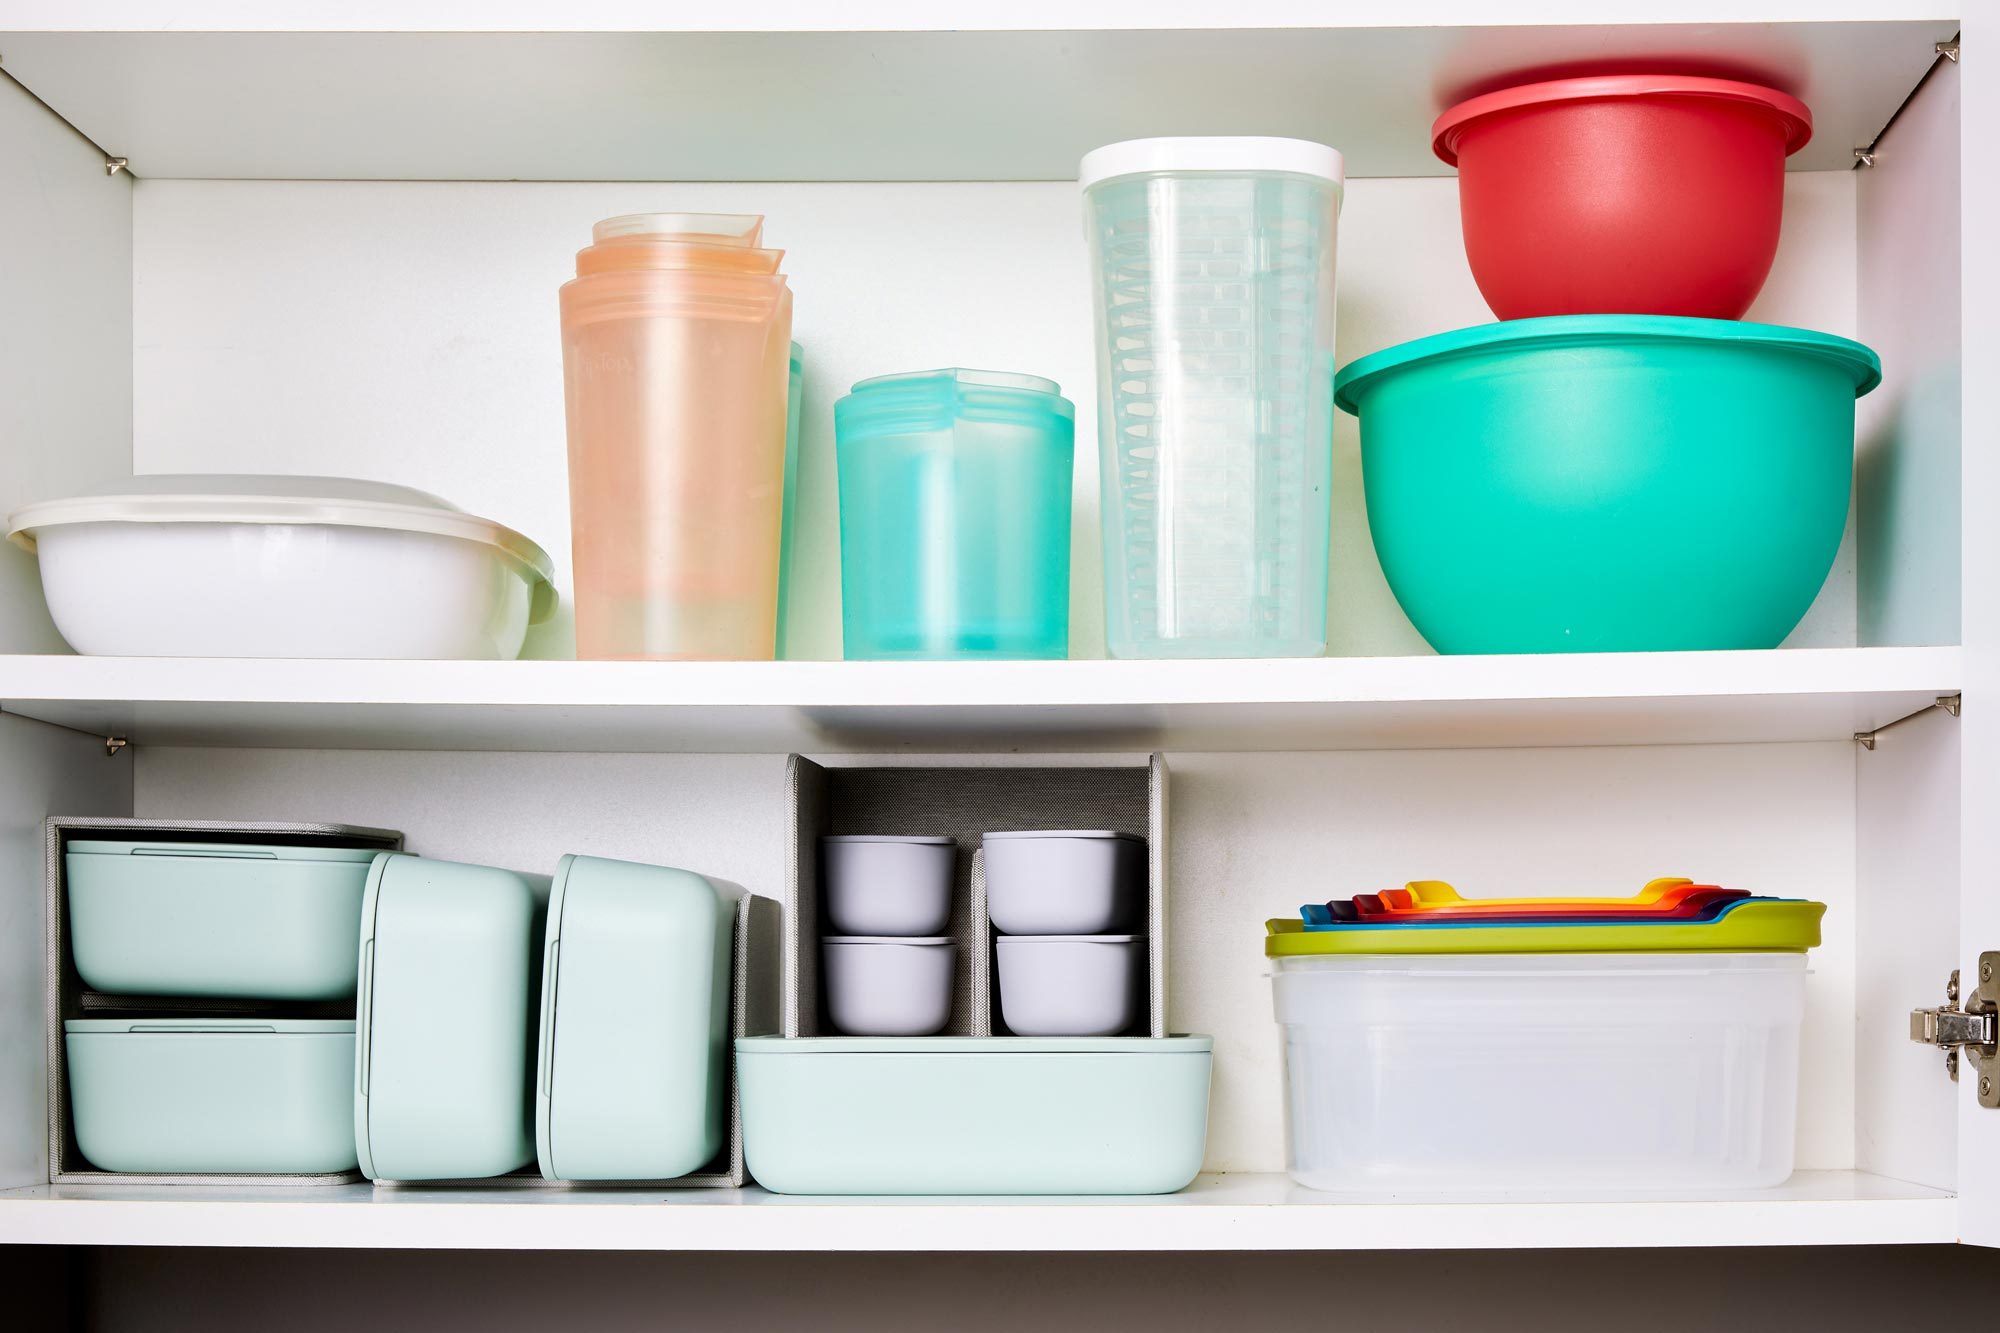 How to Organize Kitchen Cabinets in 9 Simple Steps